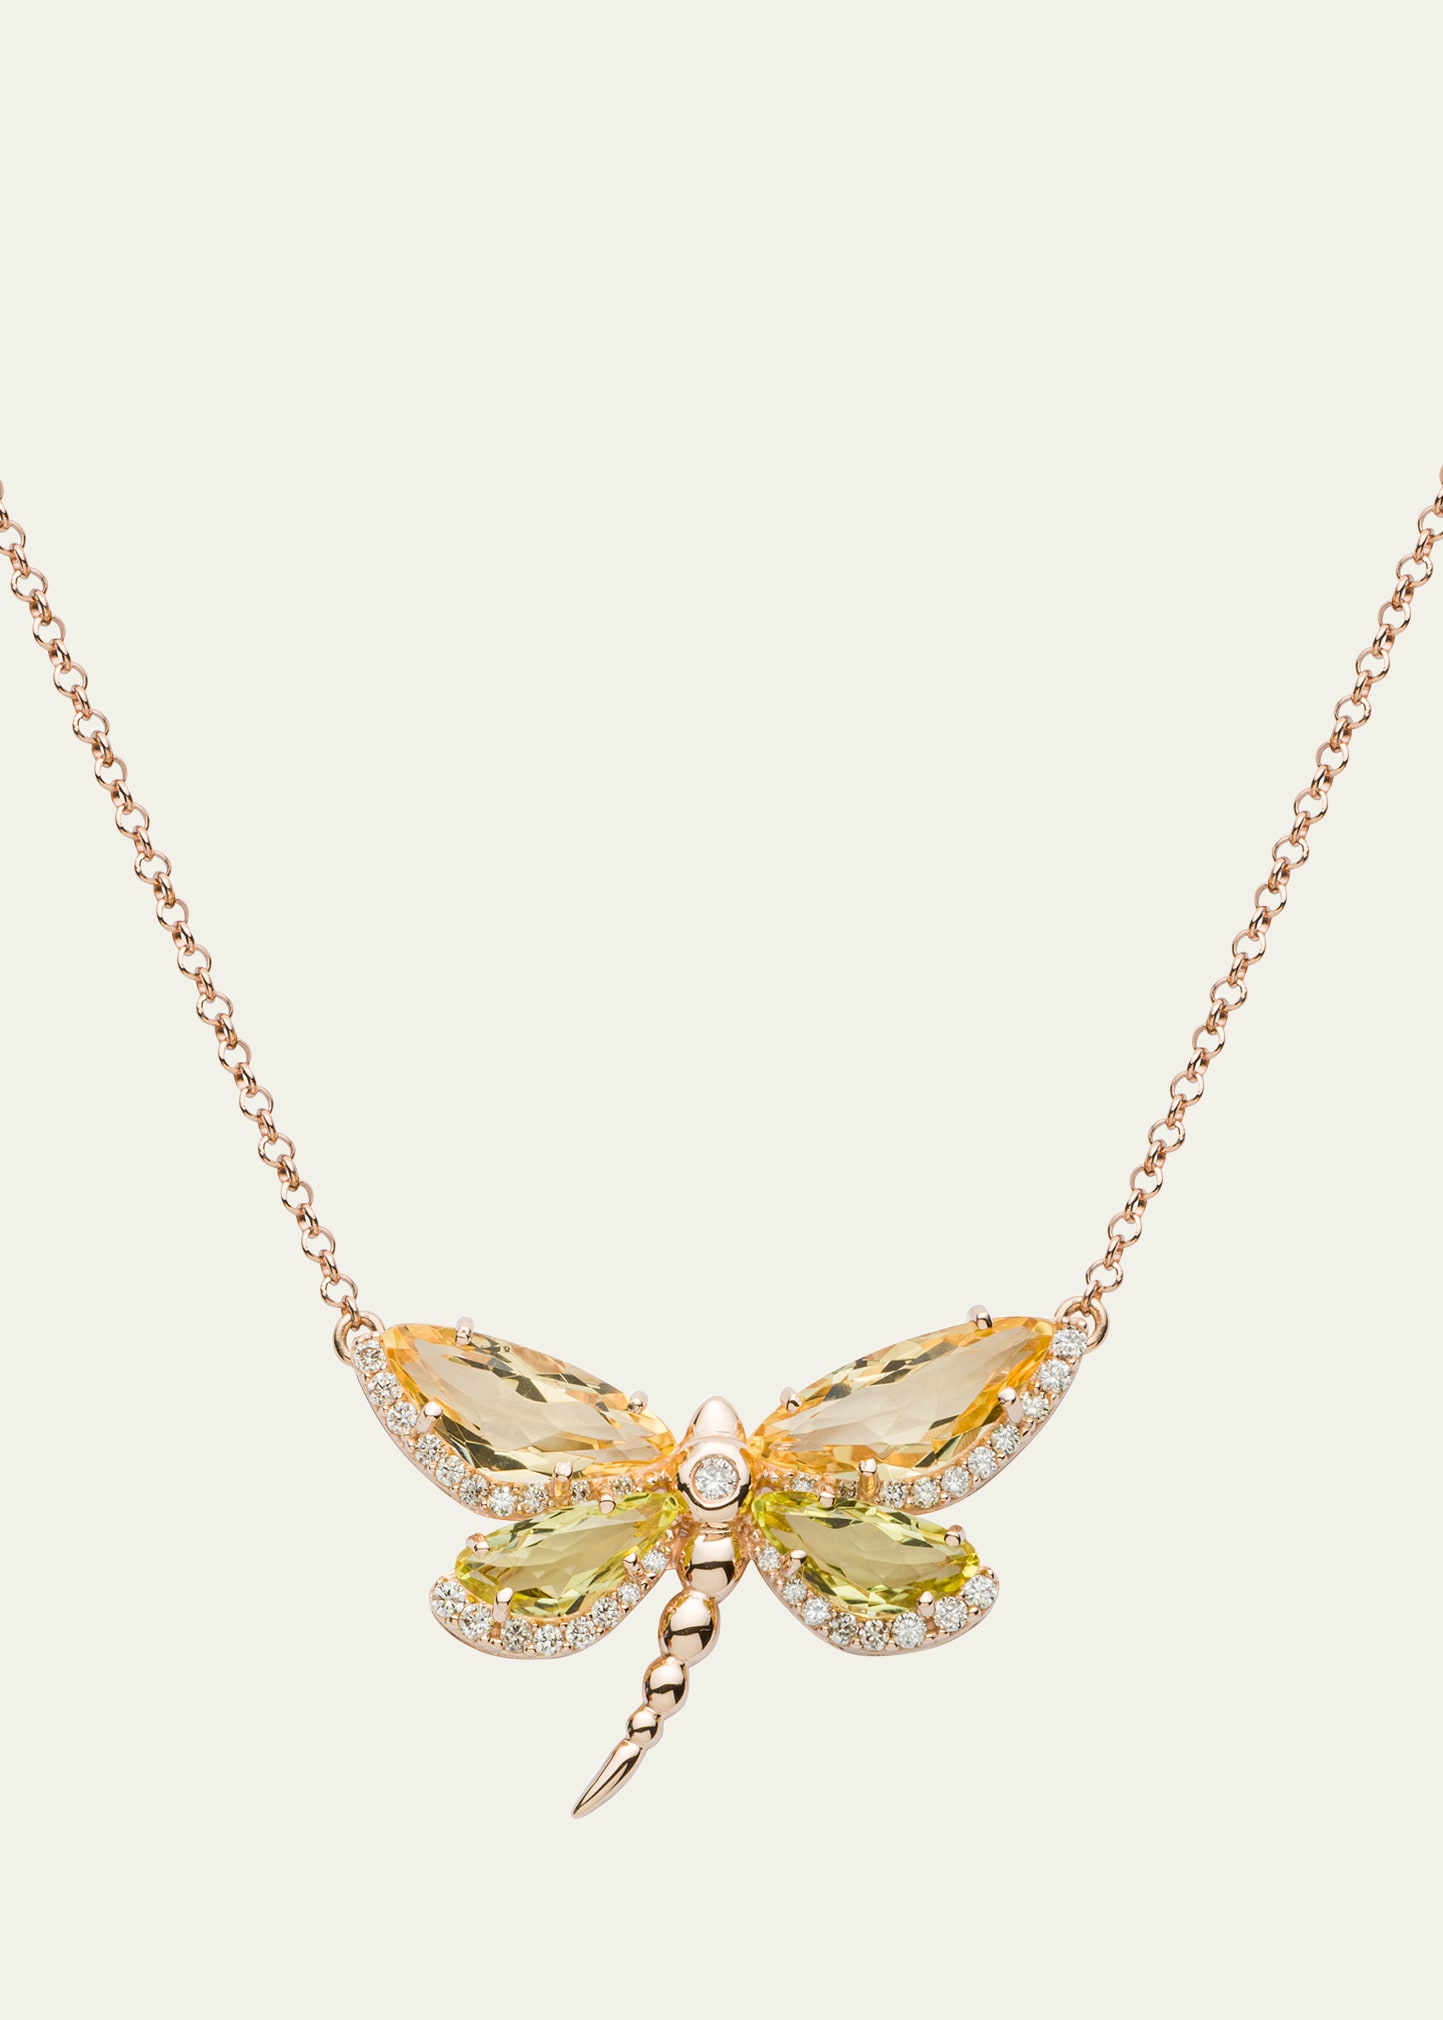 Citrine and Quartz Dragonfly Necklace with Diamonds